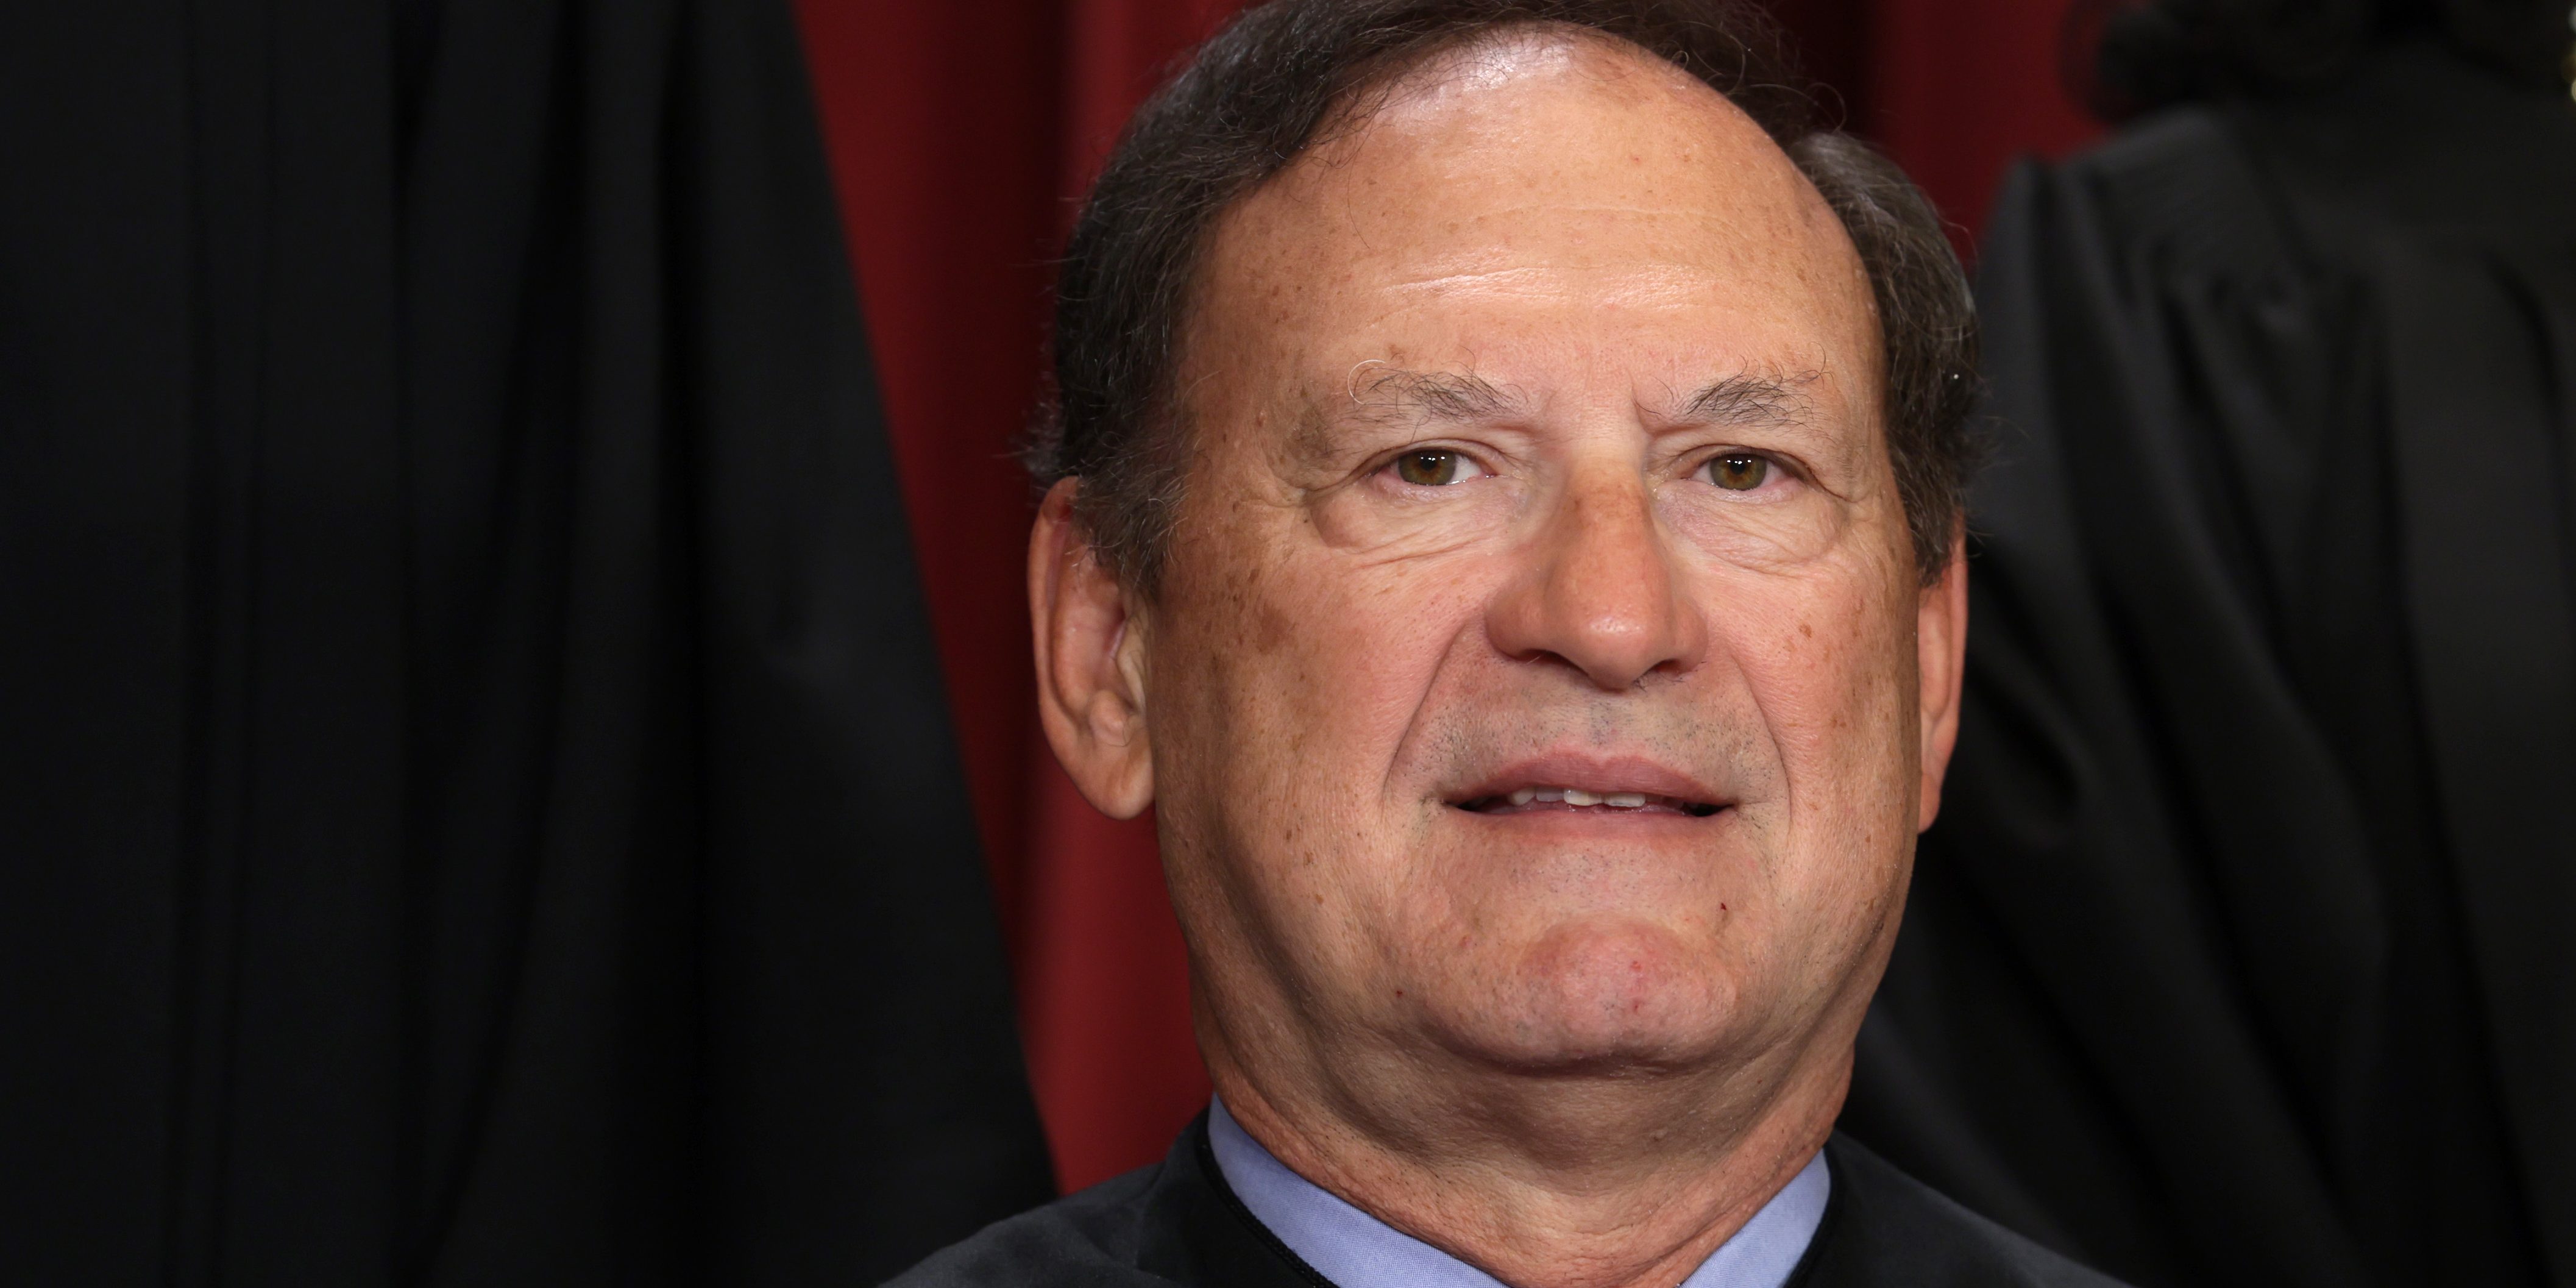 WASHINGTON, DC - OCTOBER 07: United States Supreme Court Associate Justice Samuel Alito poses for an official portrait at the East Conference Room of the Supreme Court building on October 7, 2022 in Washington, DC. The Supreme Court has begun a new term after Associate Justice Ketanji Brown Jackson was officially added to the bench in September. (Photo by Alex Wong/Getty Images)